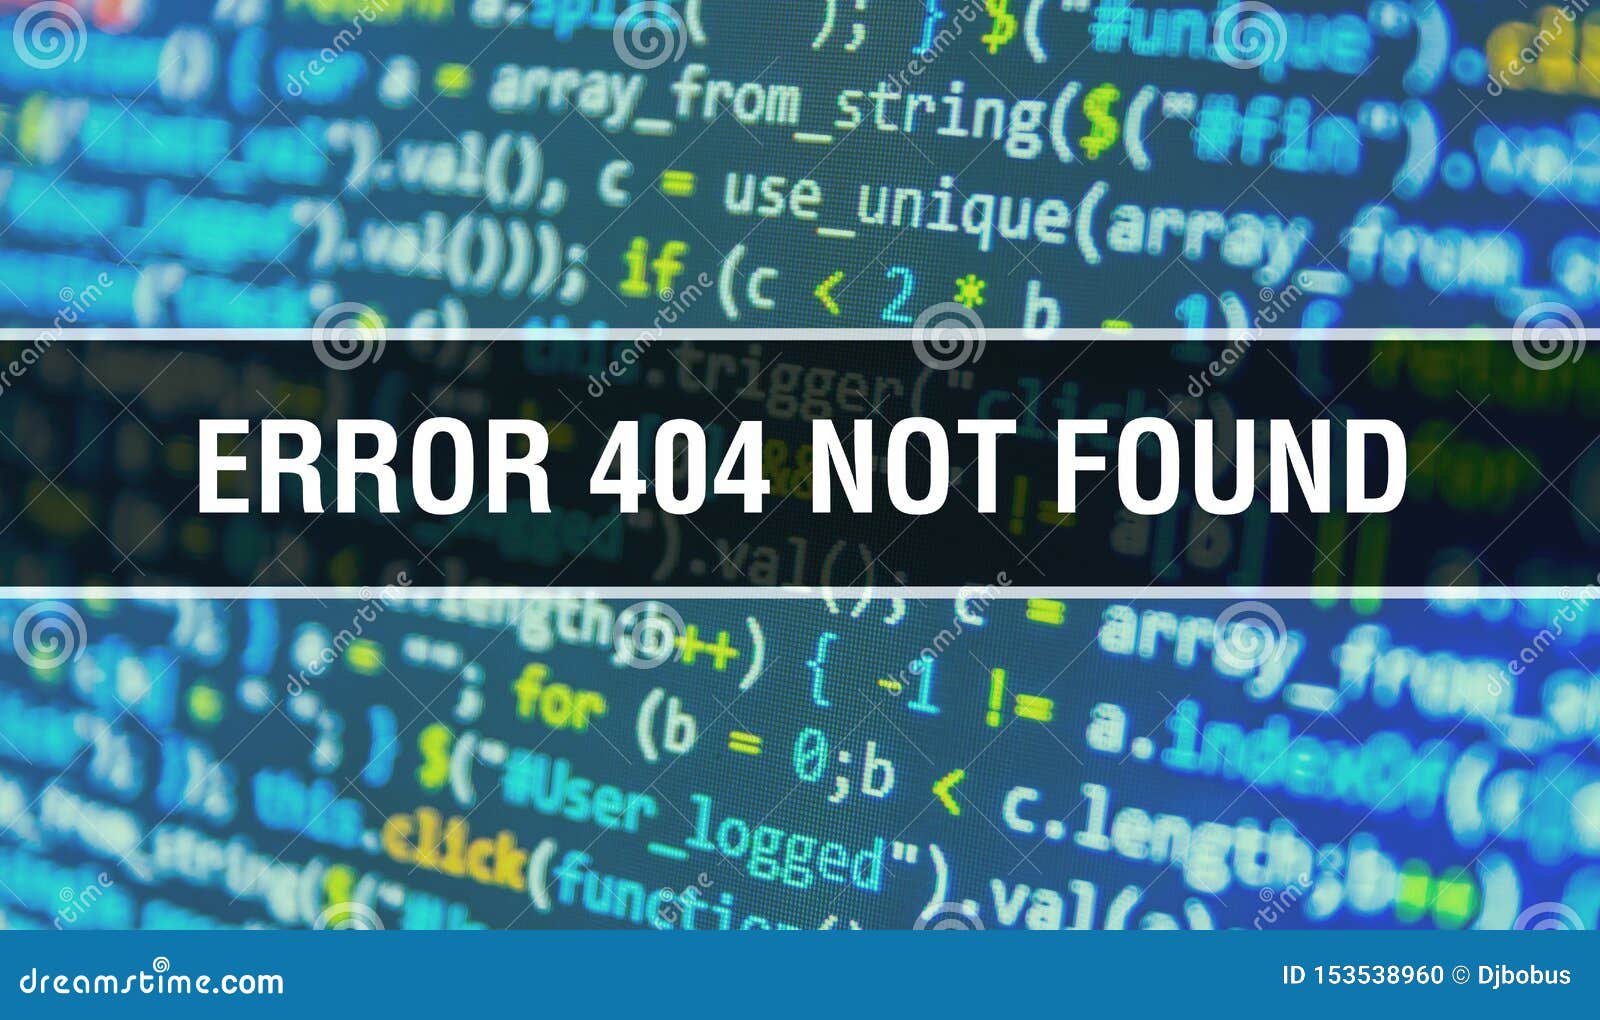 Error 404 Not Found Concept Illustration Using Code For Developing Programs And App Error 404 Not Found Website Code With Stock Photo Image Of Code Application